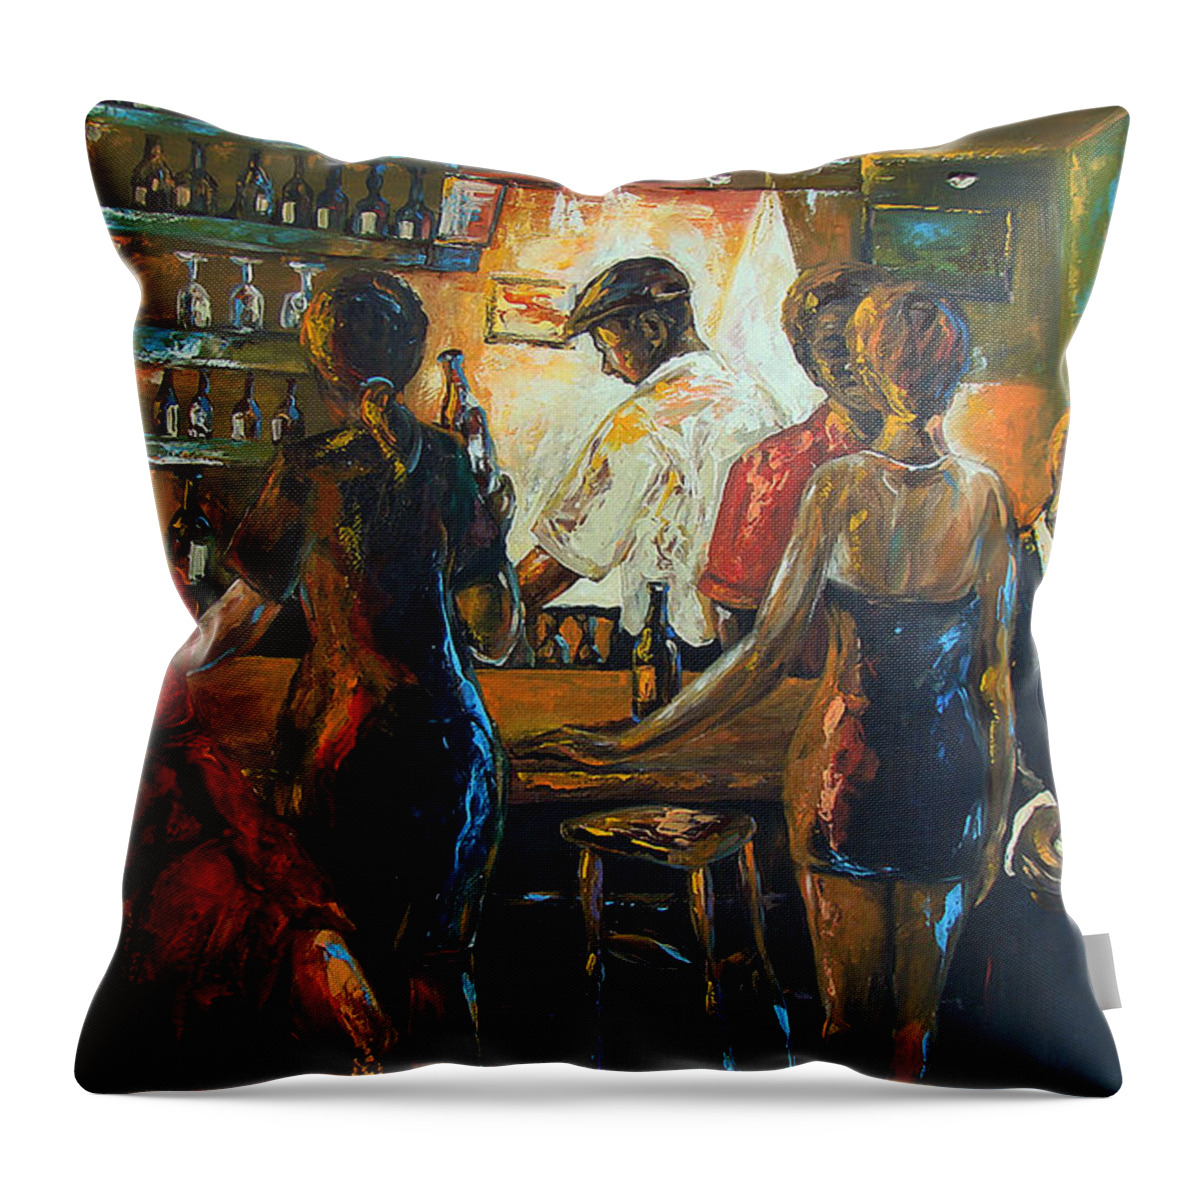 Midnight Blue Series Throw Pillow featuring the painting Friends by Berthold Moyo